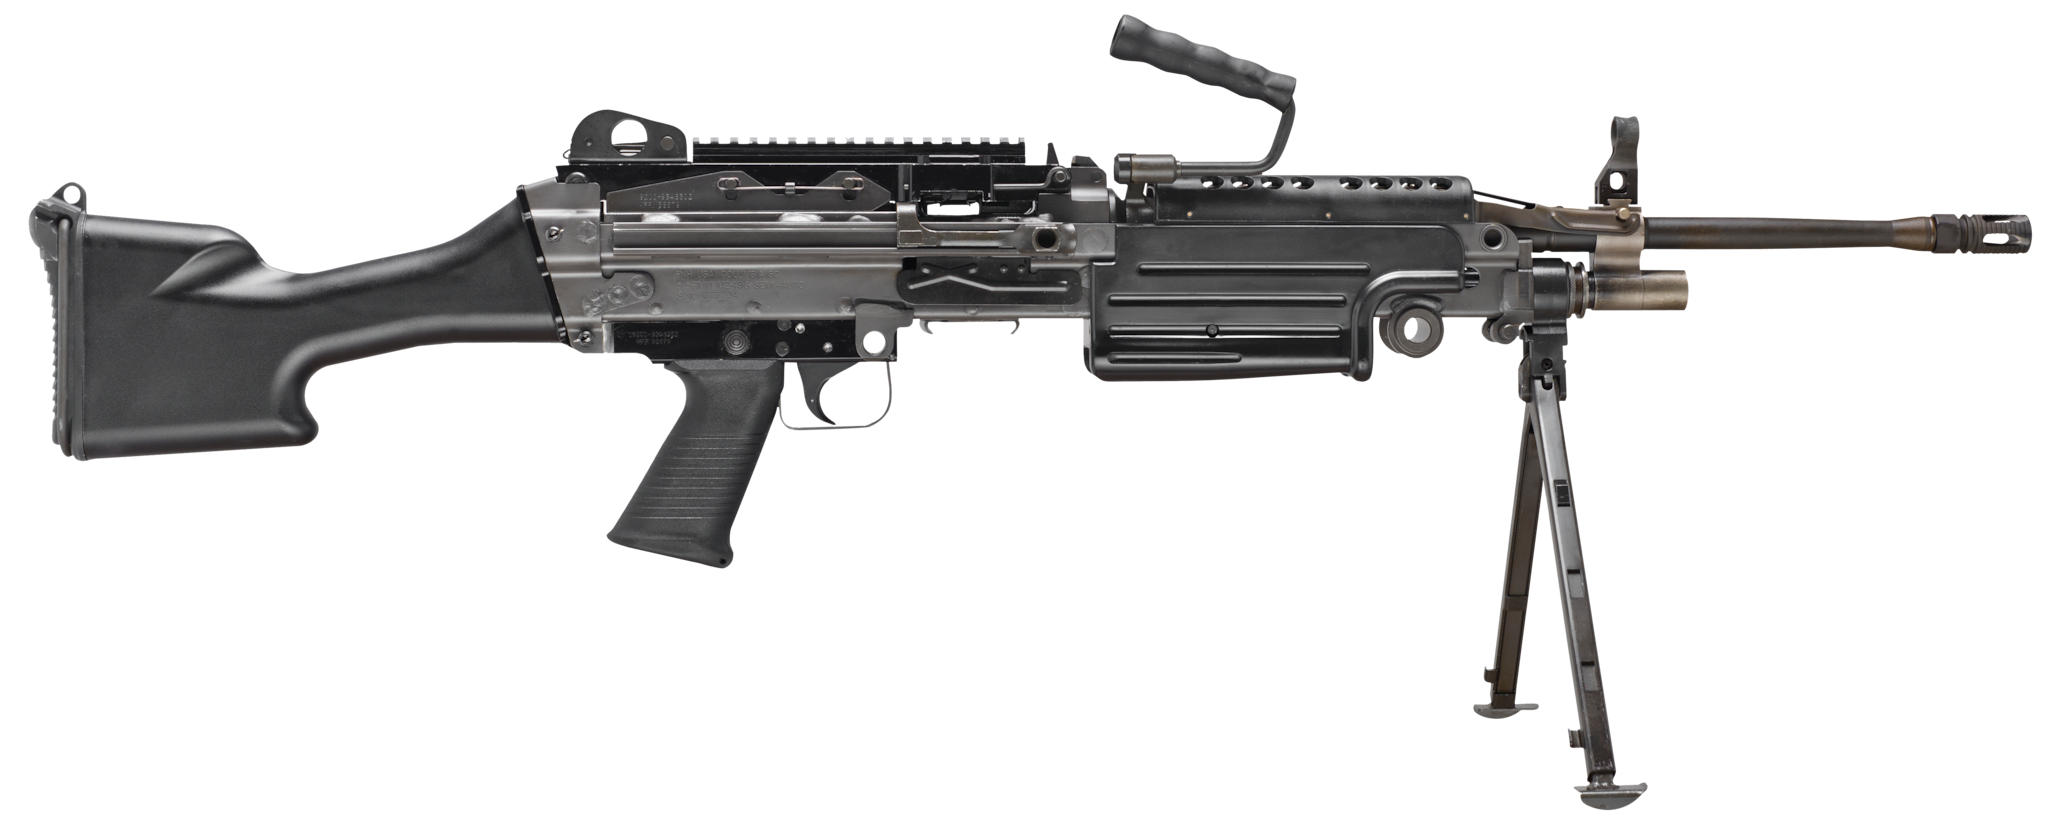 Image of Fn M249S SAW Military Collector 5.56mm, 18.5" Barrel, Black, 30rd